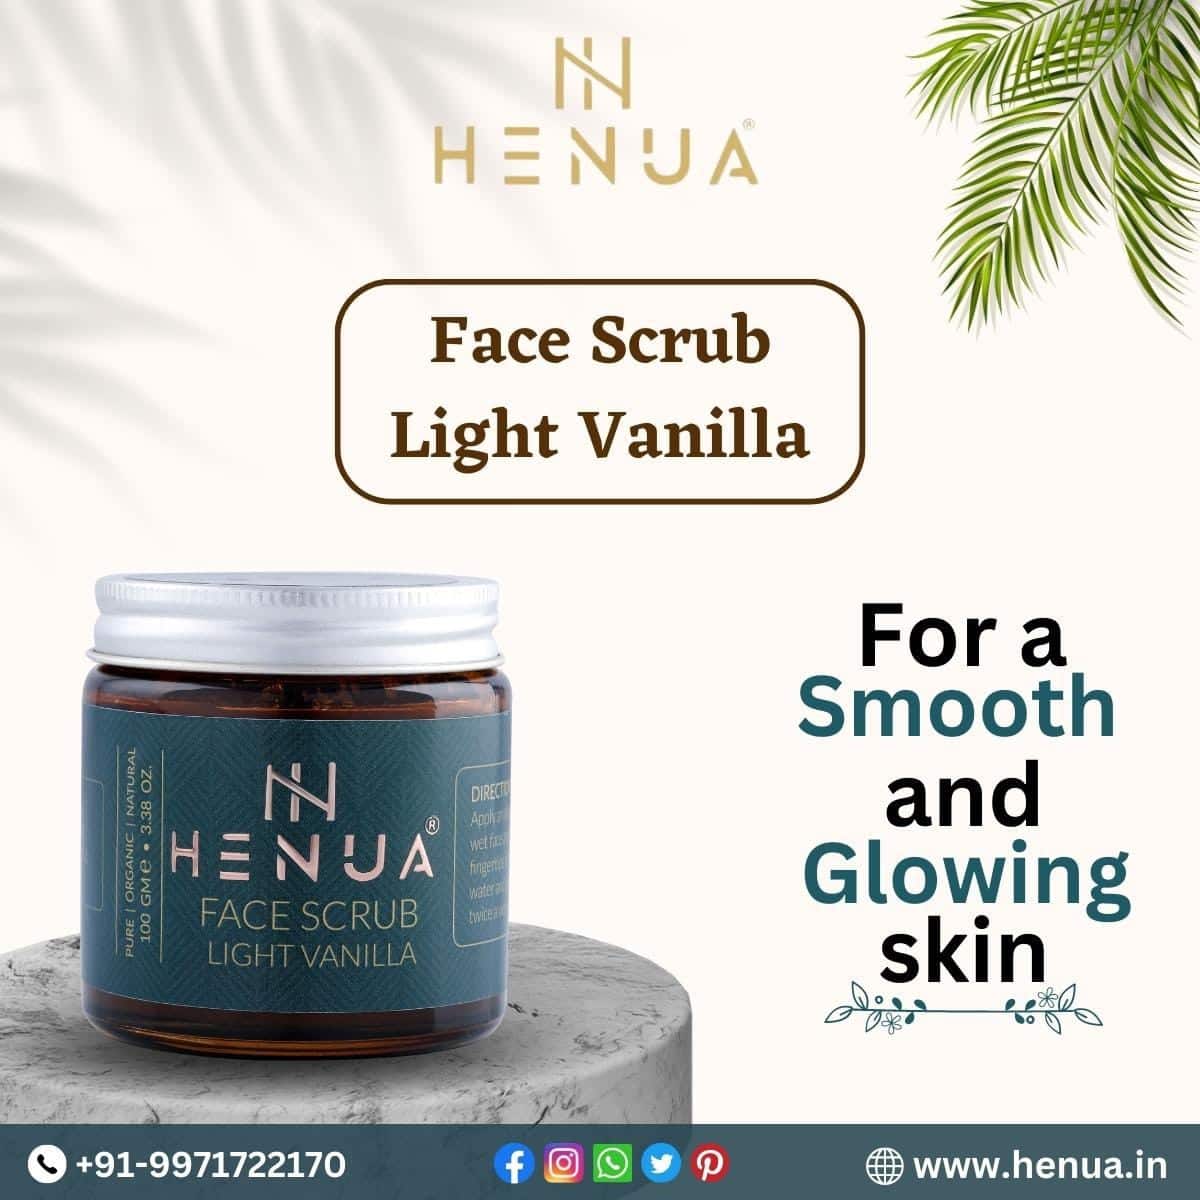 Henua-Face-Scrub-For-Smooth-And-Glowing-Skin-Light-Vanilla